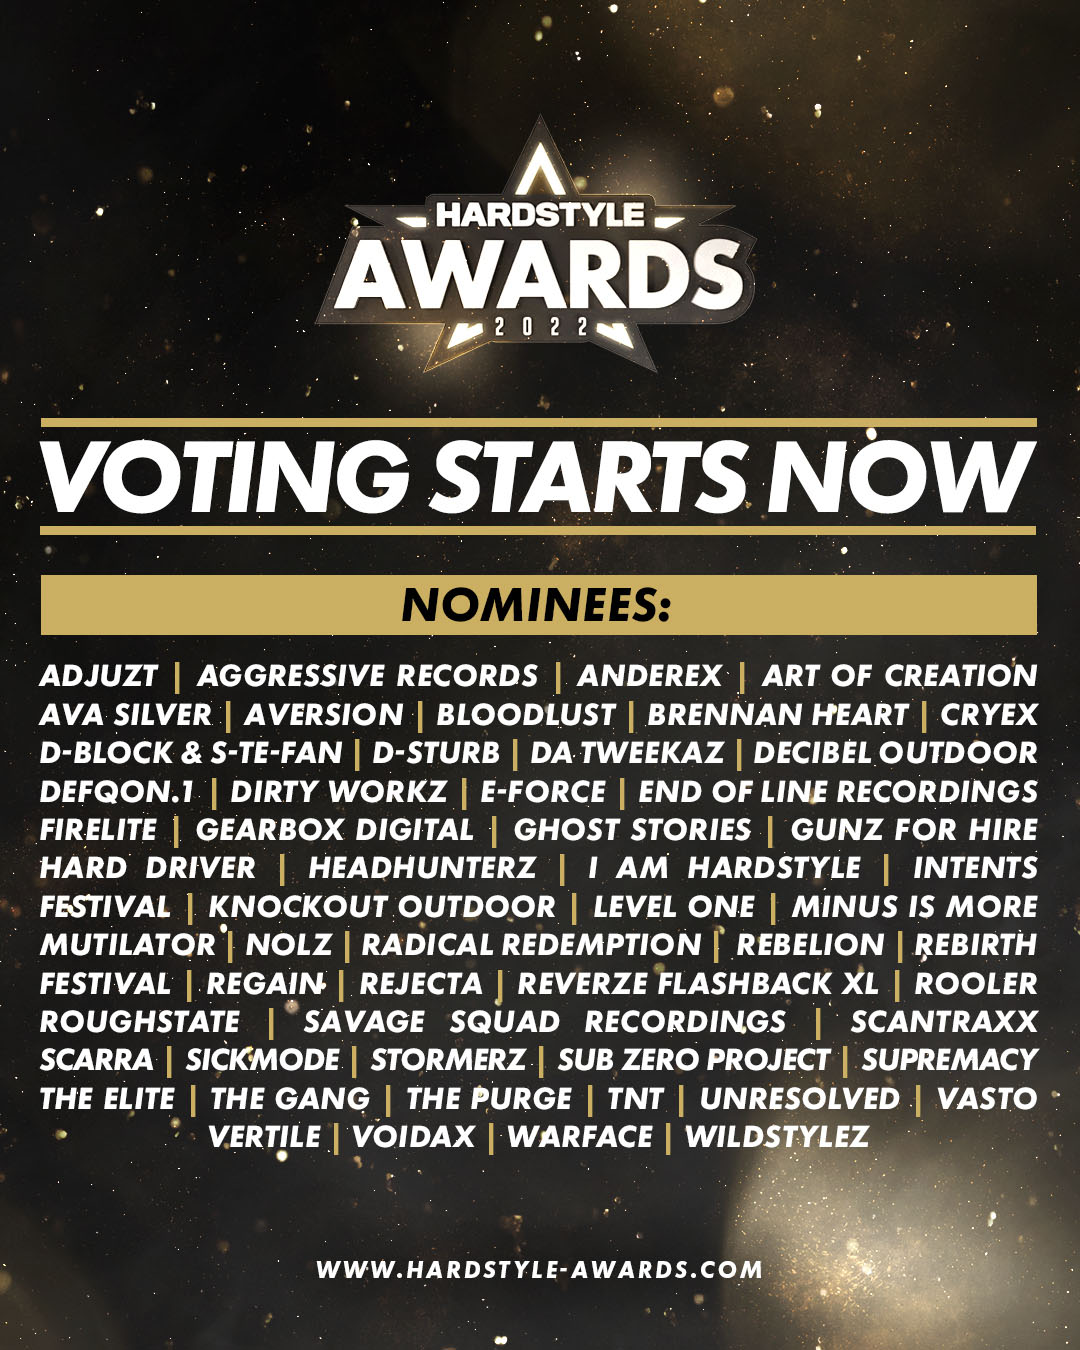 Hardstyle awards nominees